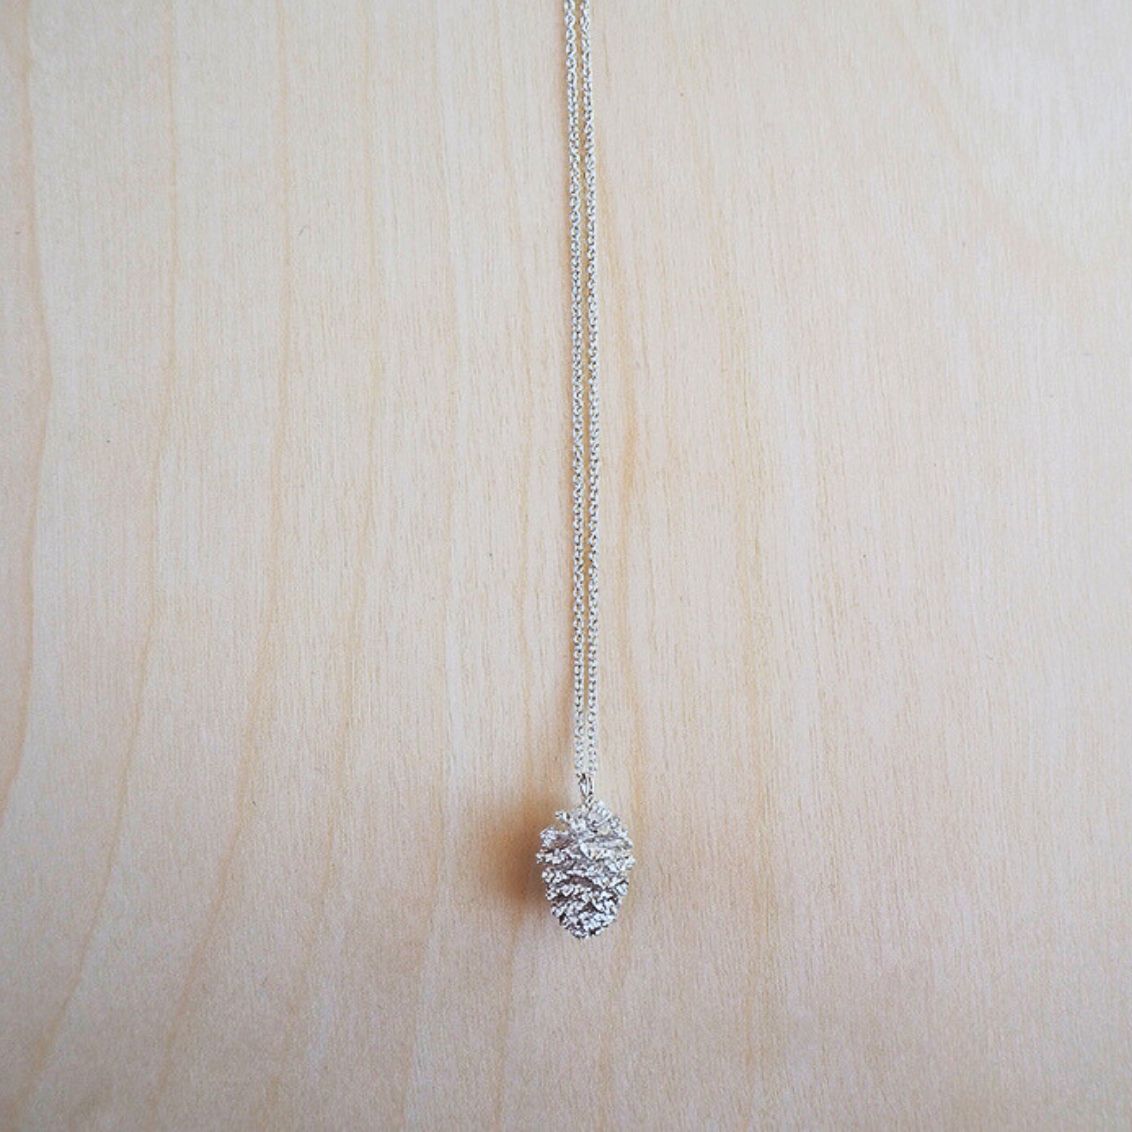 Pine Cone Necklace Sterling Silver